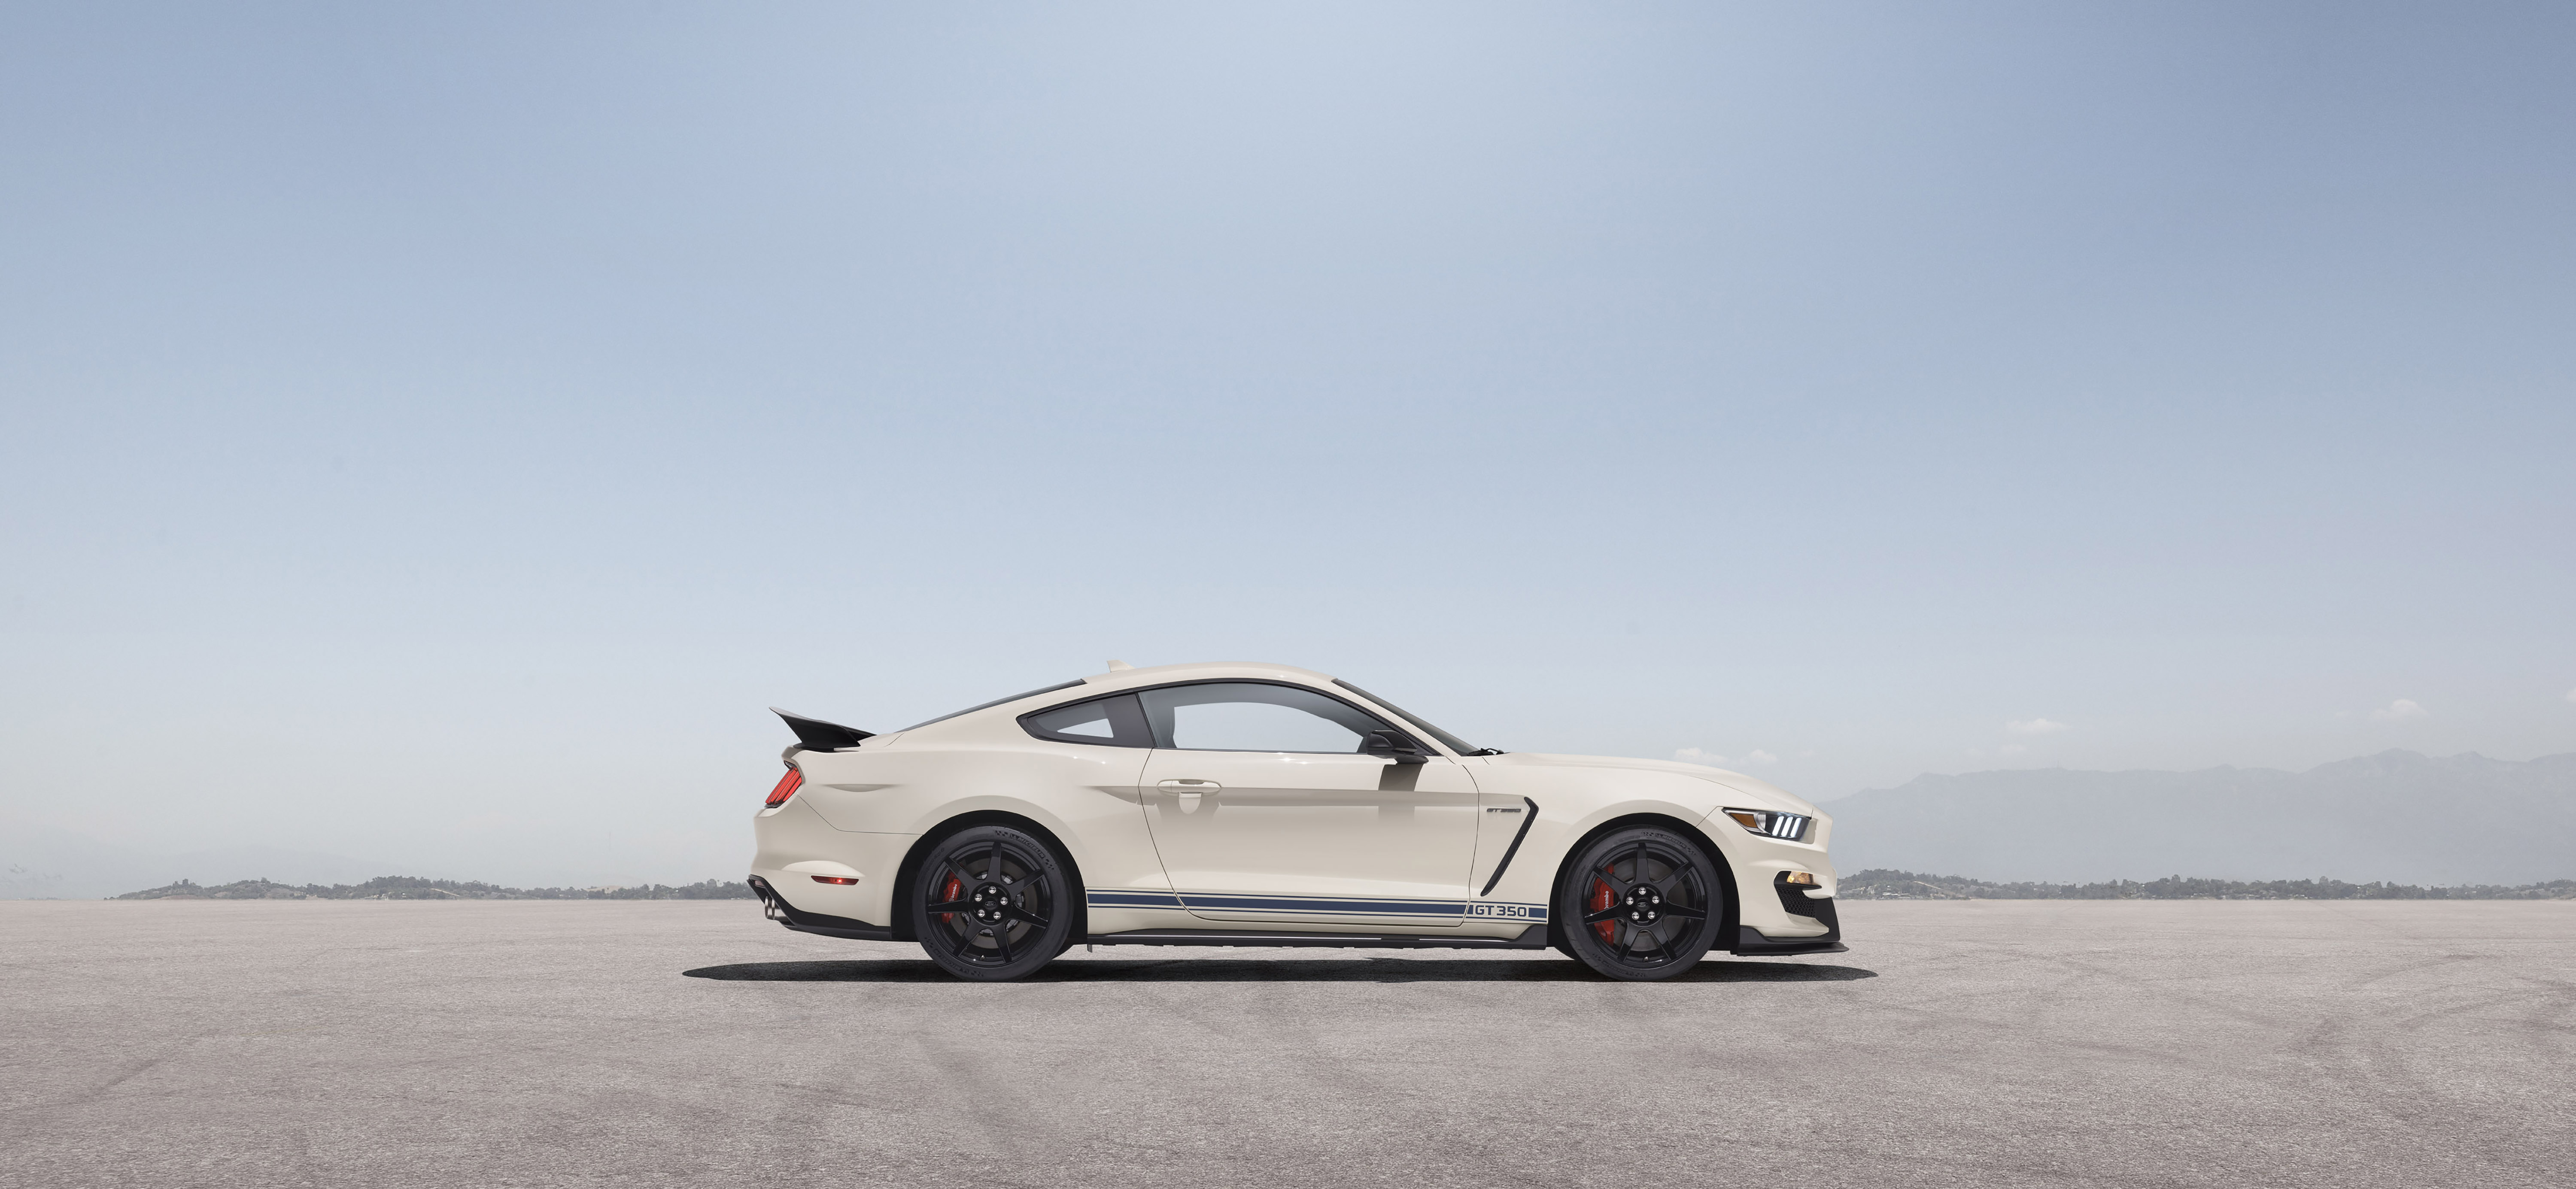 2020 Ford Mustang Shelby GT350 | Ford Media Center